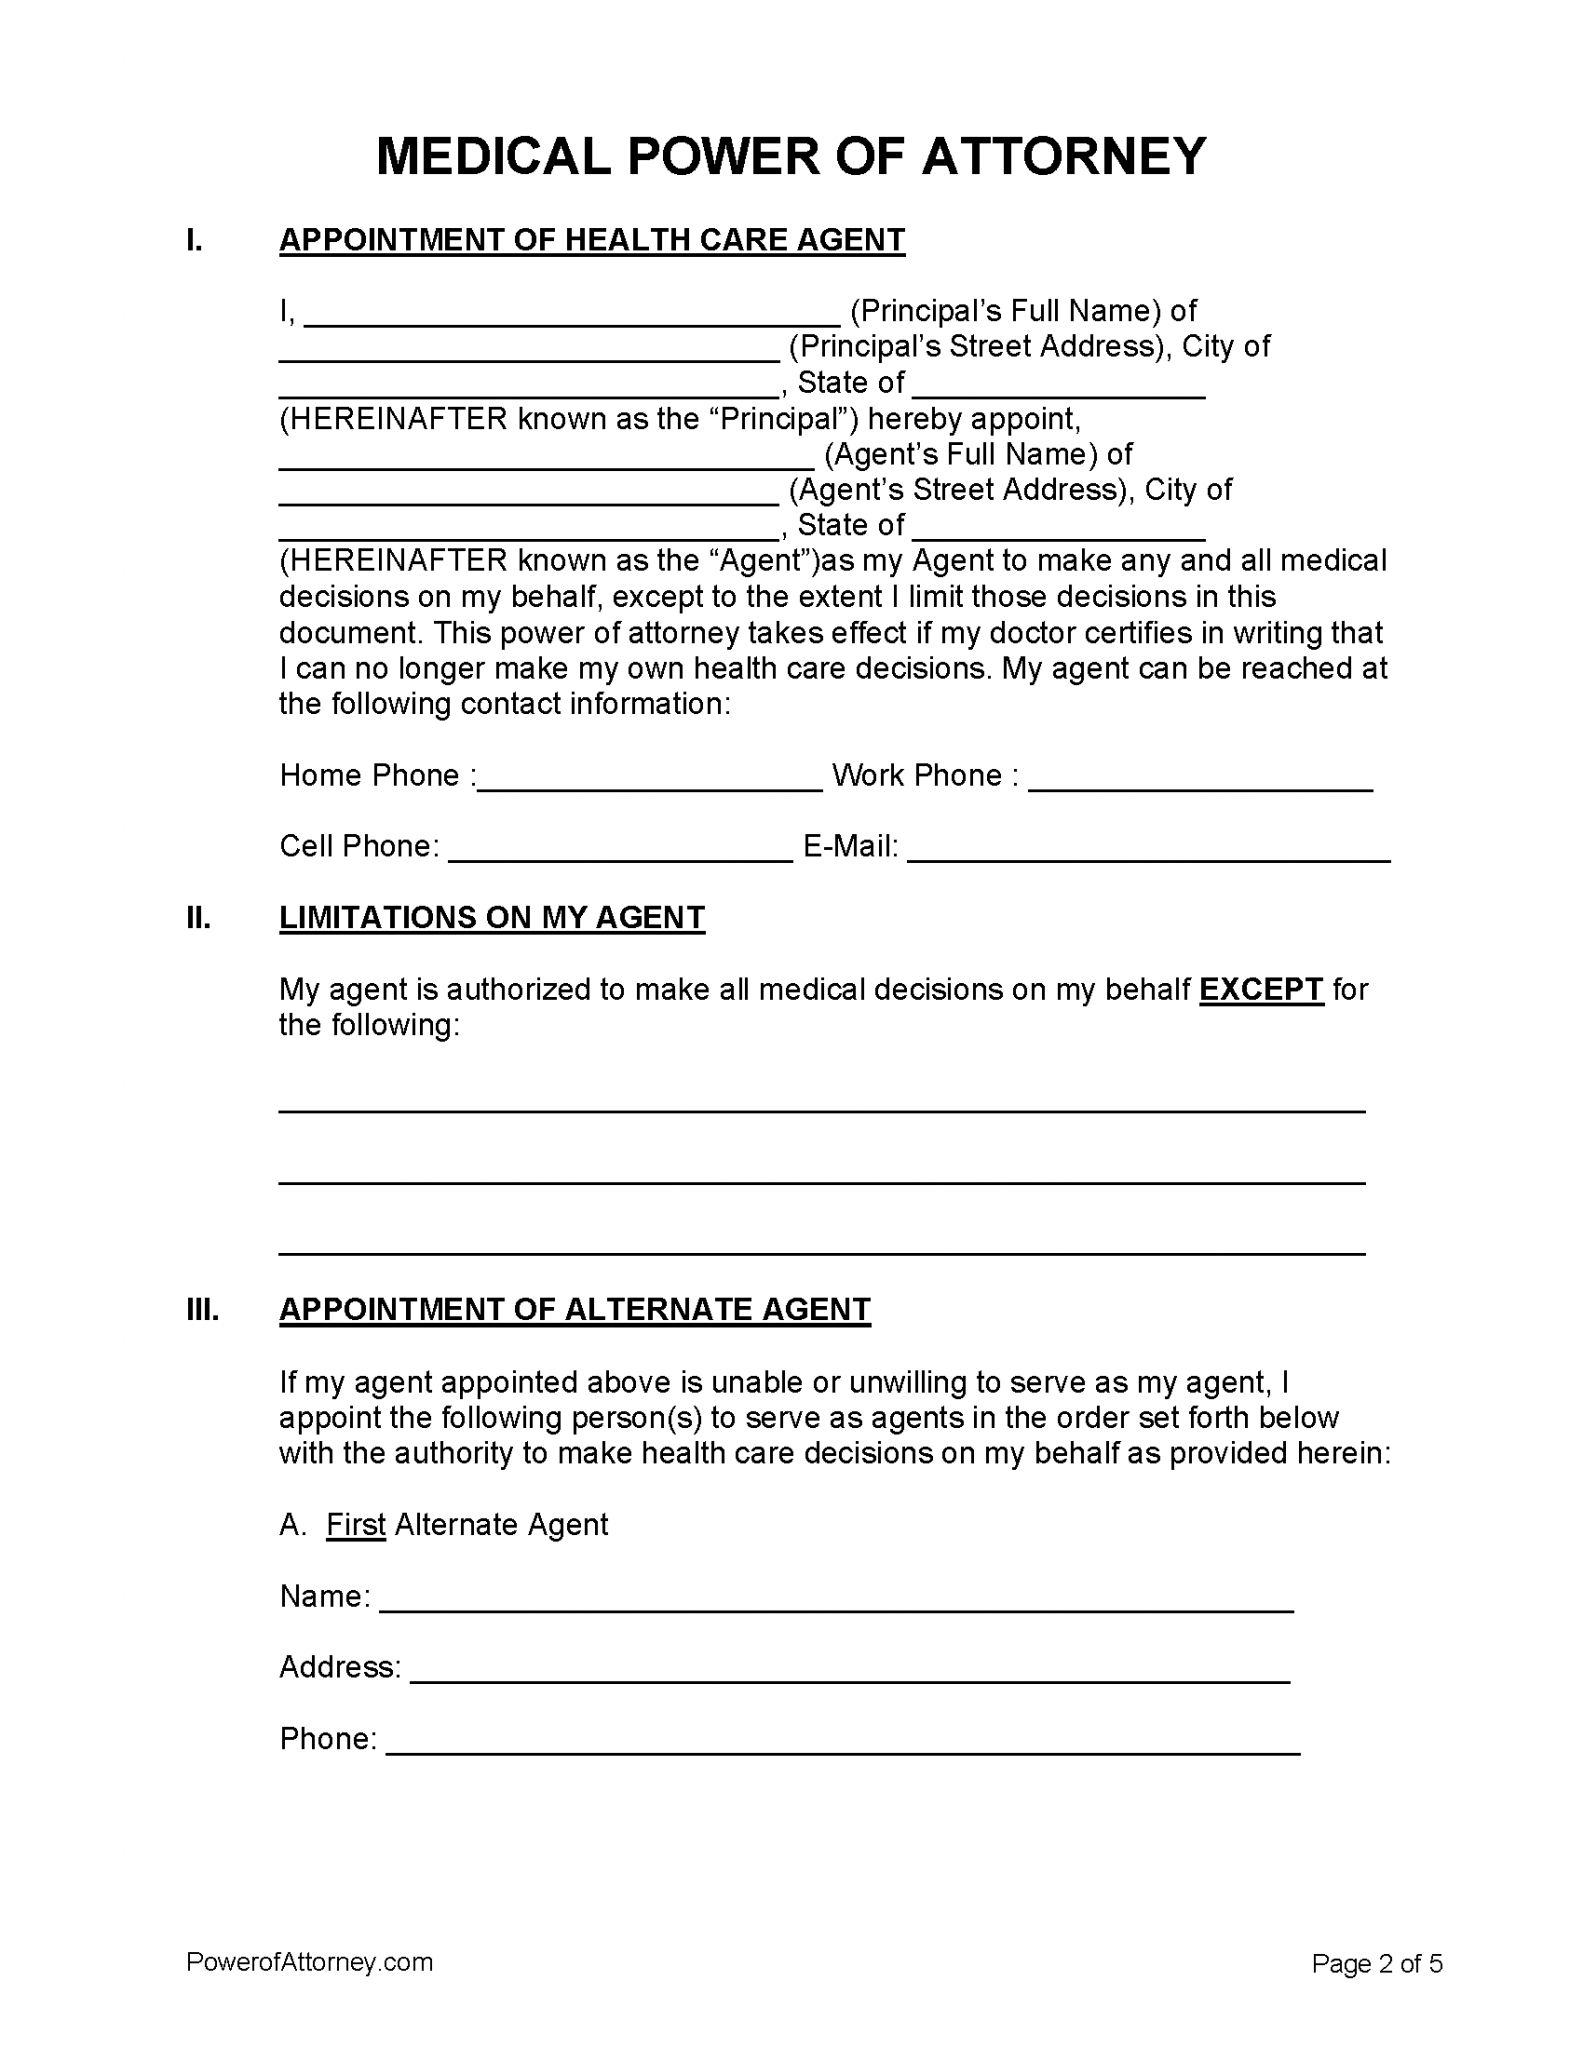 printable-power-of-attorney-medical-form-printable-forms-free-online